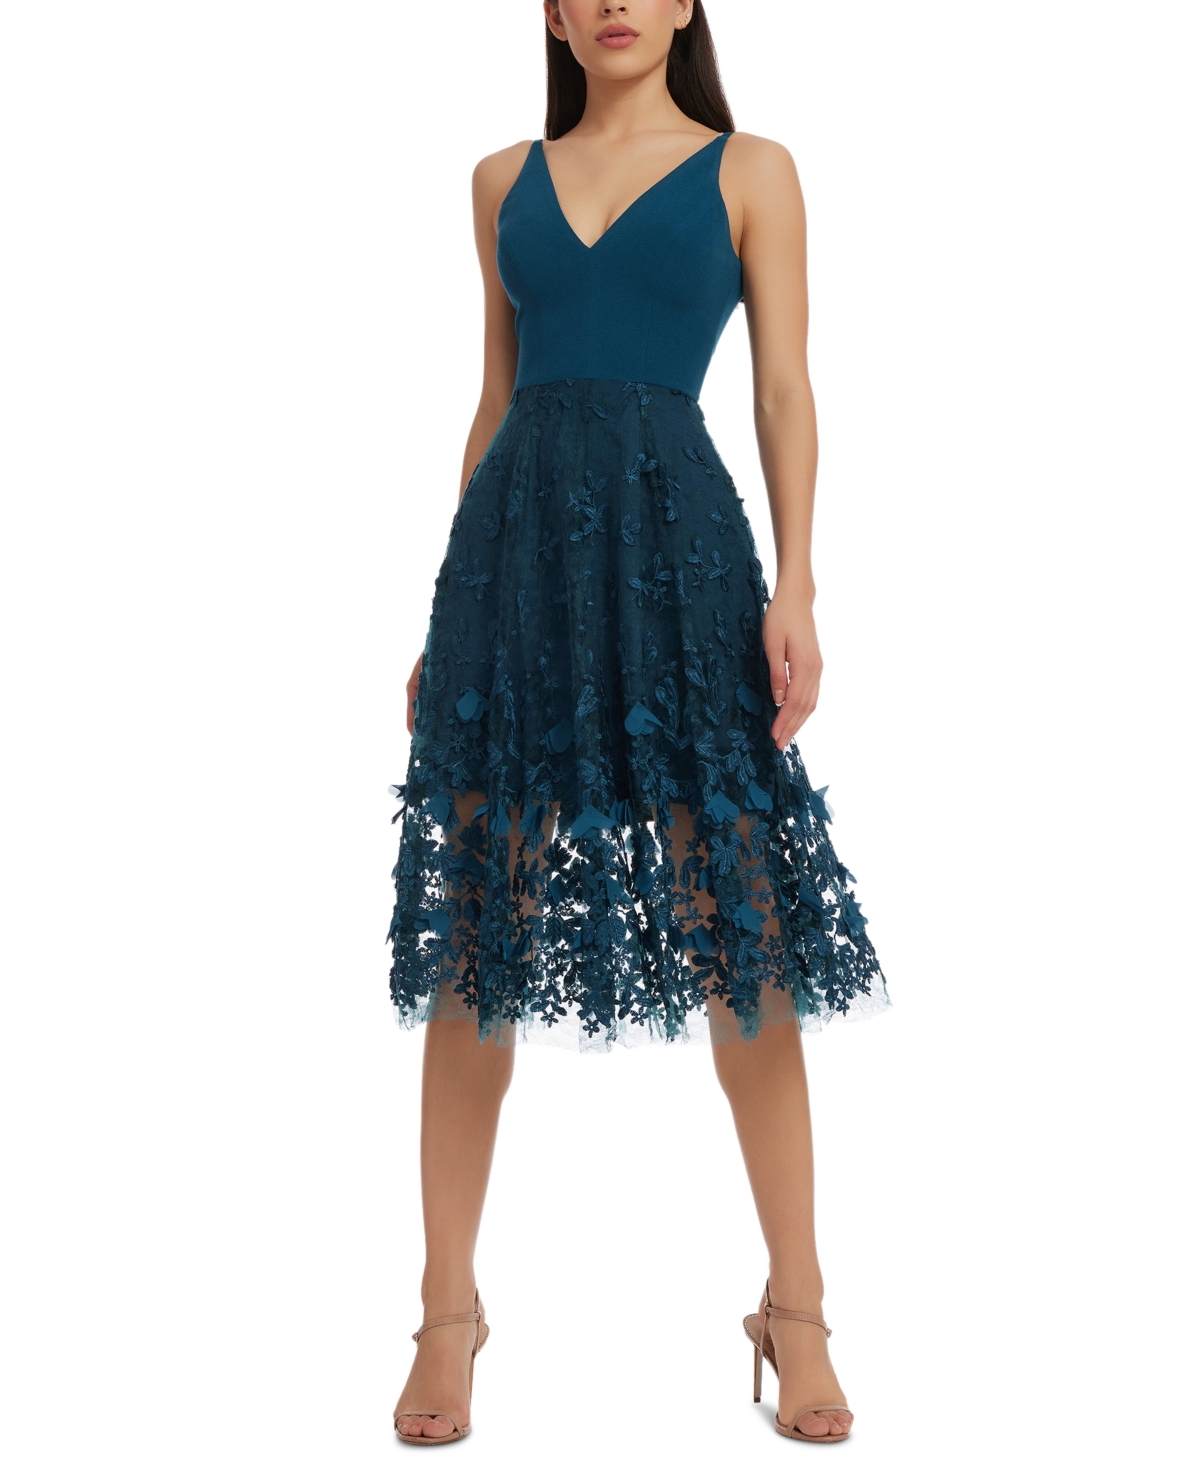 Dress The Population Plunging Darleen Neck Fit & Flare Dress In Peacock Blue